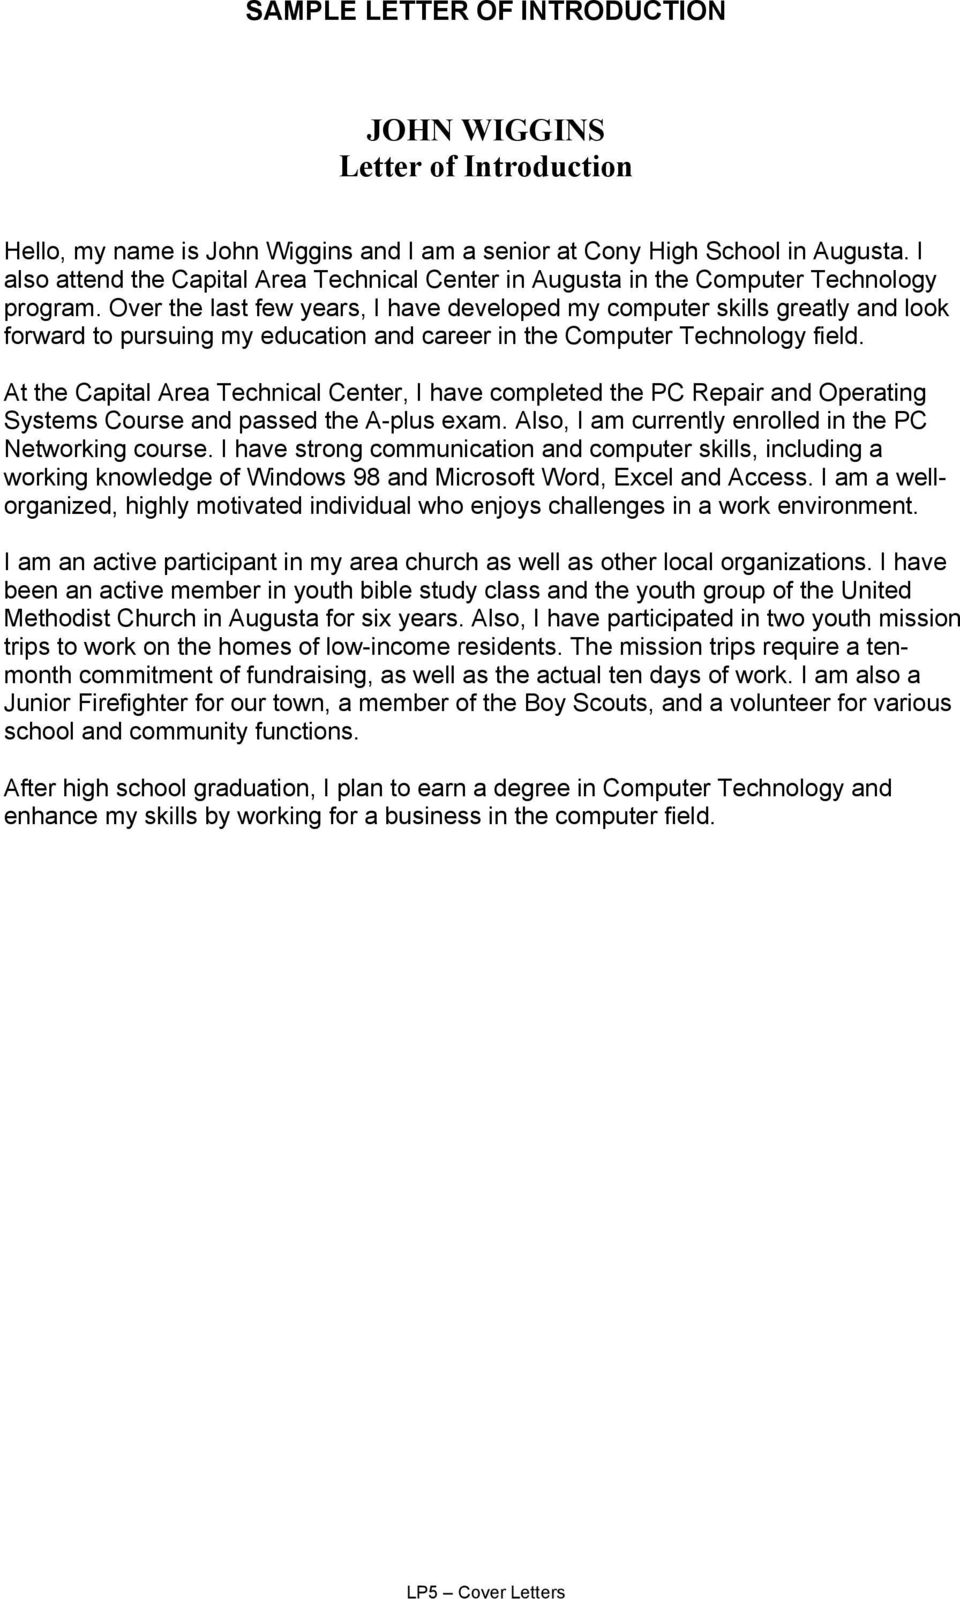 Over the last few years, I have developed my computer skills greatly and look forward to pursuing my education and career in the Computer Technology field.